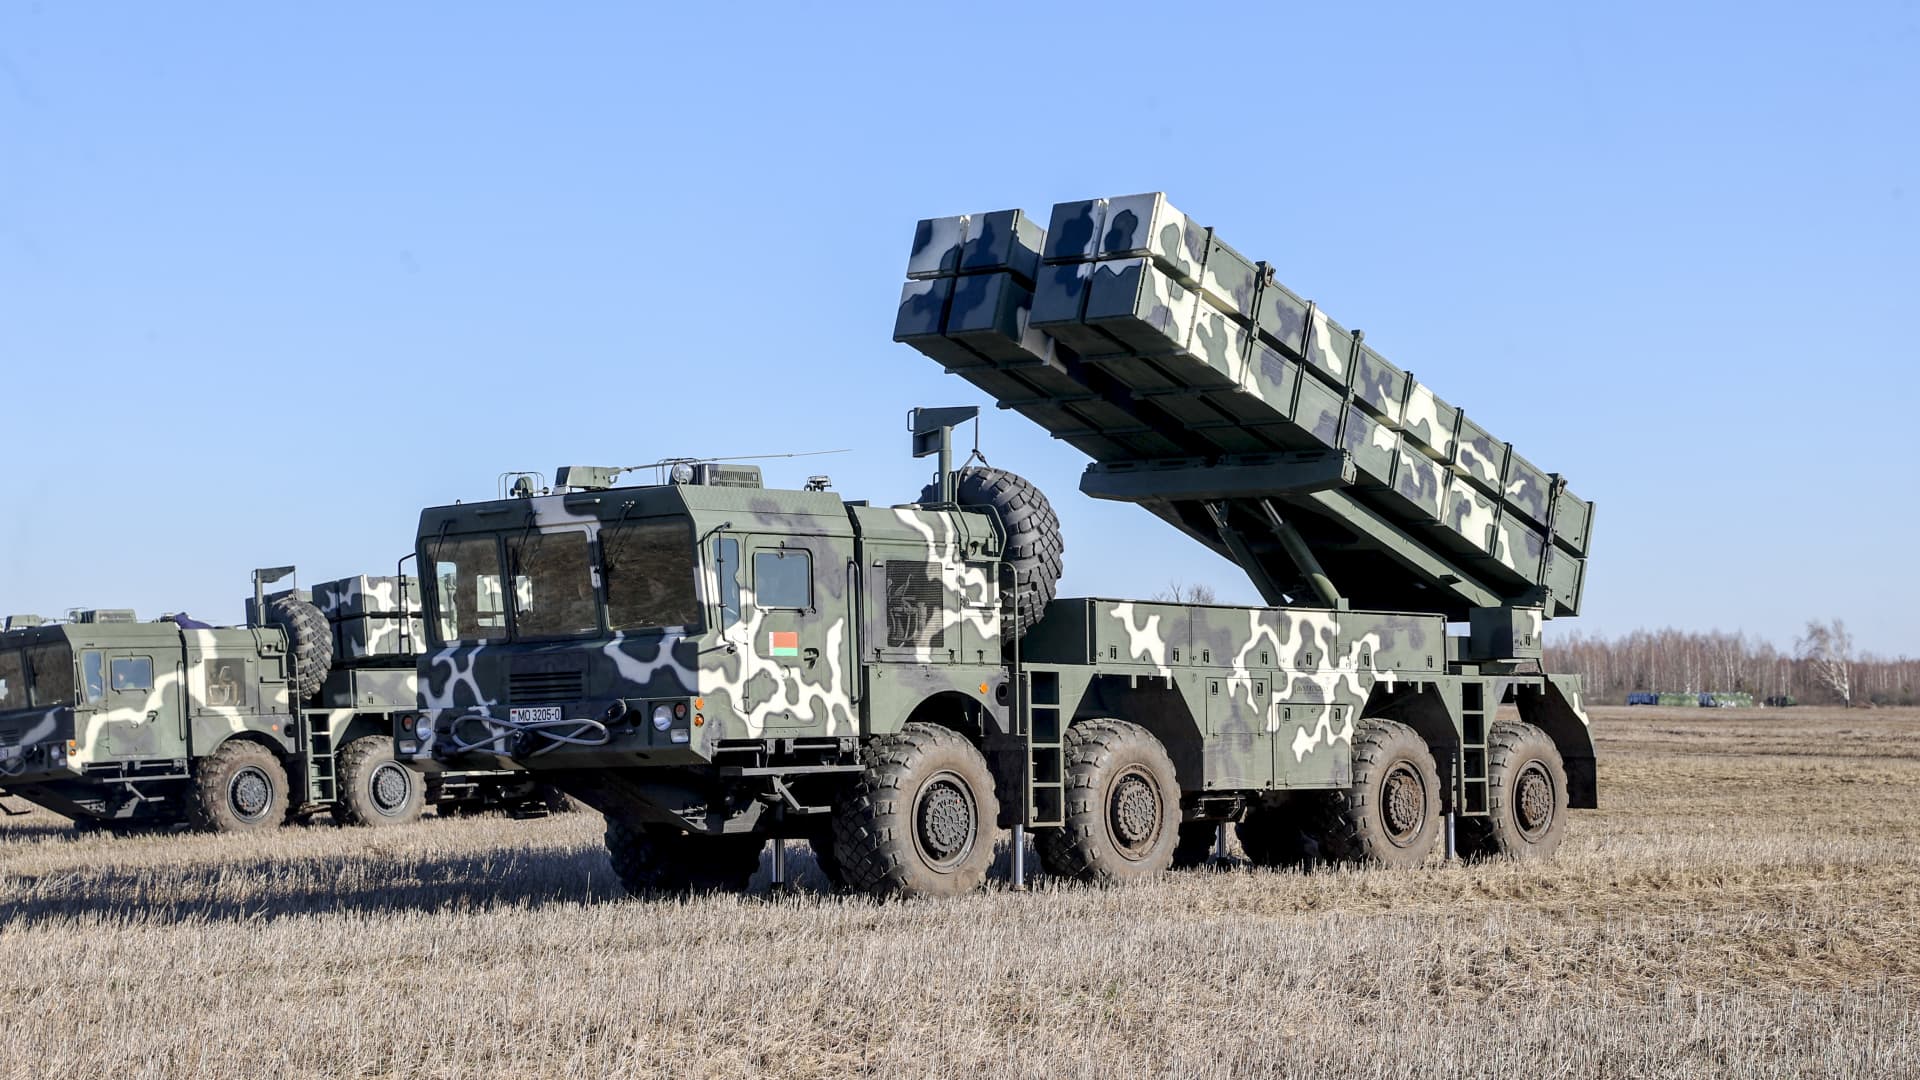 OTR-21 Tochka tactical ballistic missile fired during the Allied Determination-2022 military drill of Russian and Belarusian armed forces in Gomel, Belarus on February 15, 2022.